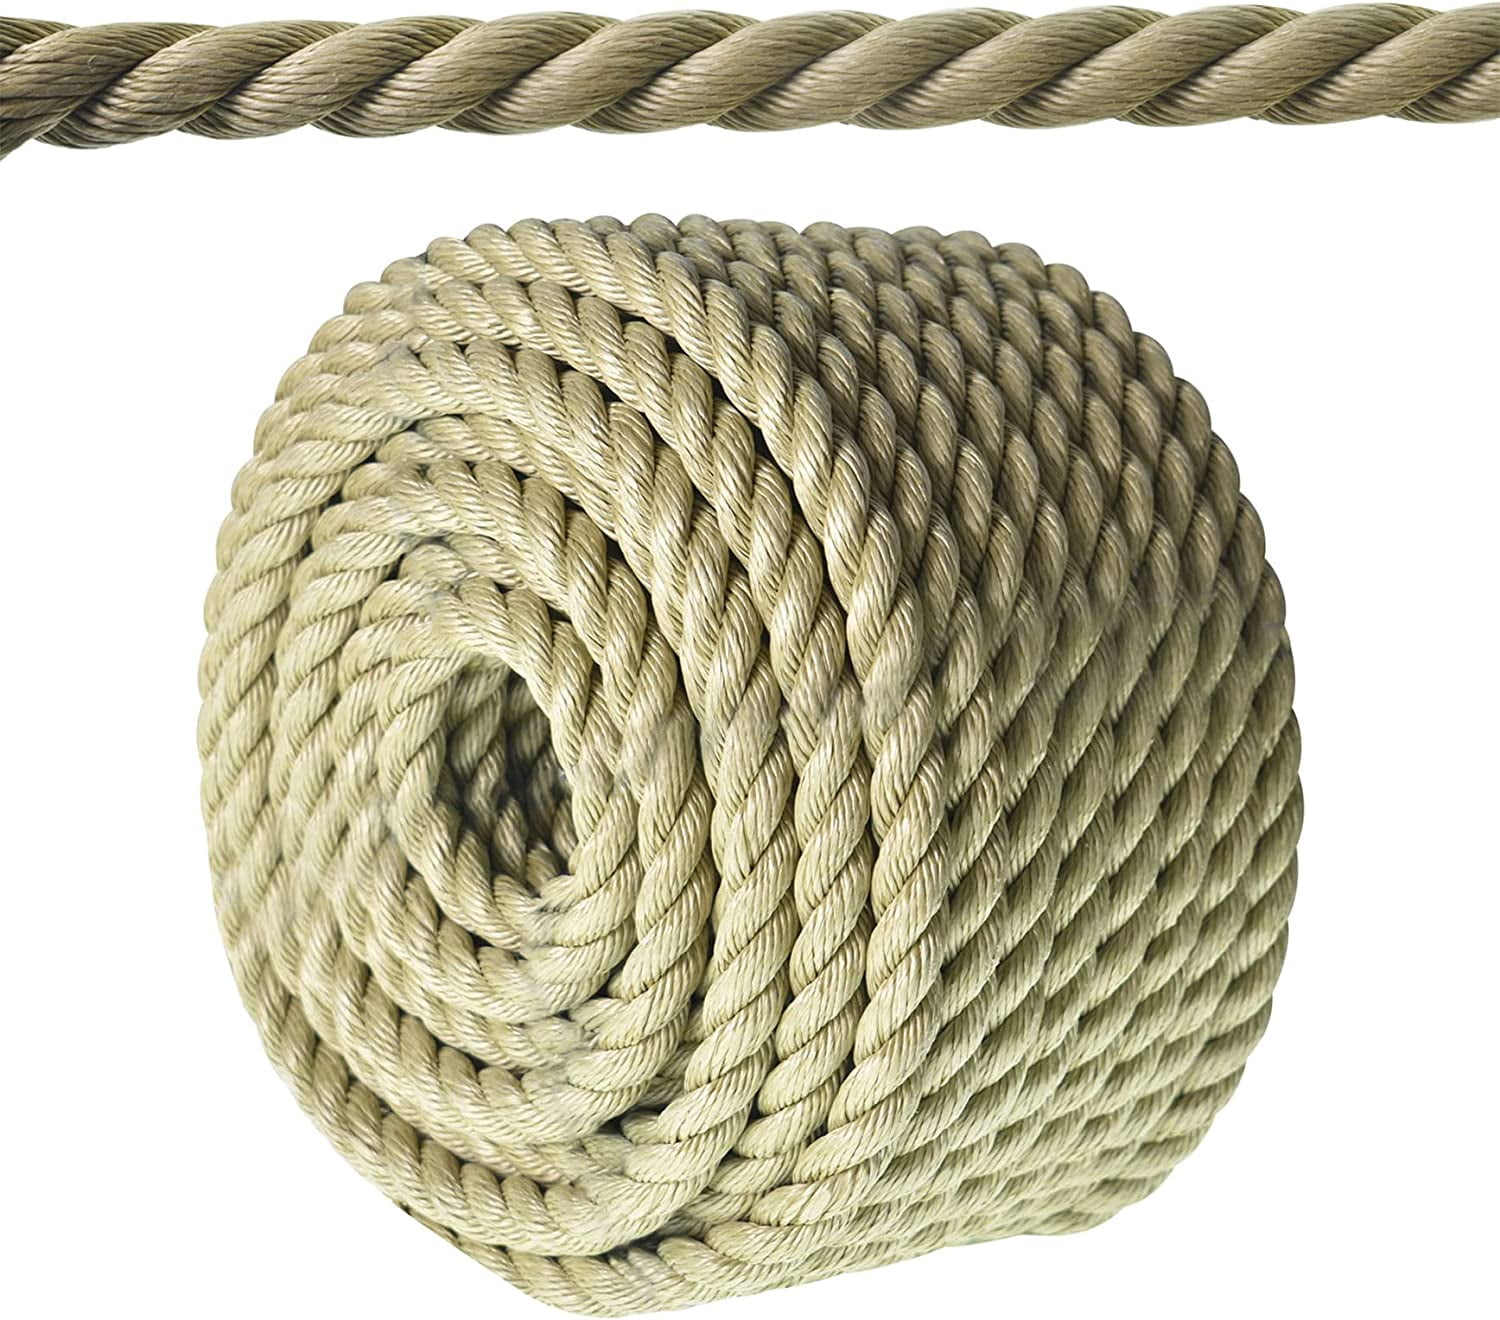 HOSTIC 3/4 in 100 FT Twisted 3 Strand Synthetic Polypropylene Rope  Artificial Manila Rope Suitable for Tree Work Camping Navigation Swing 